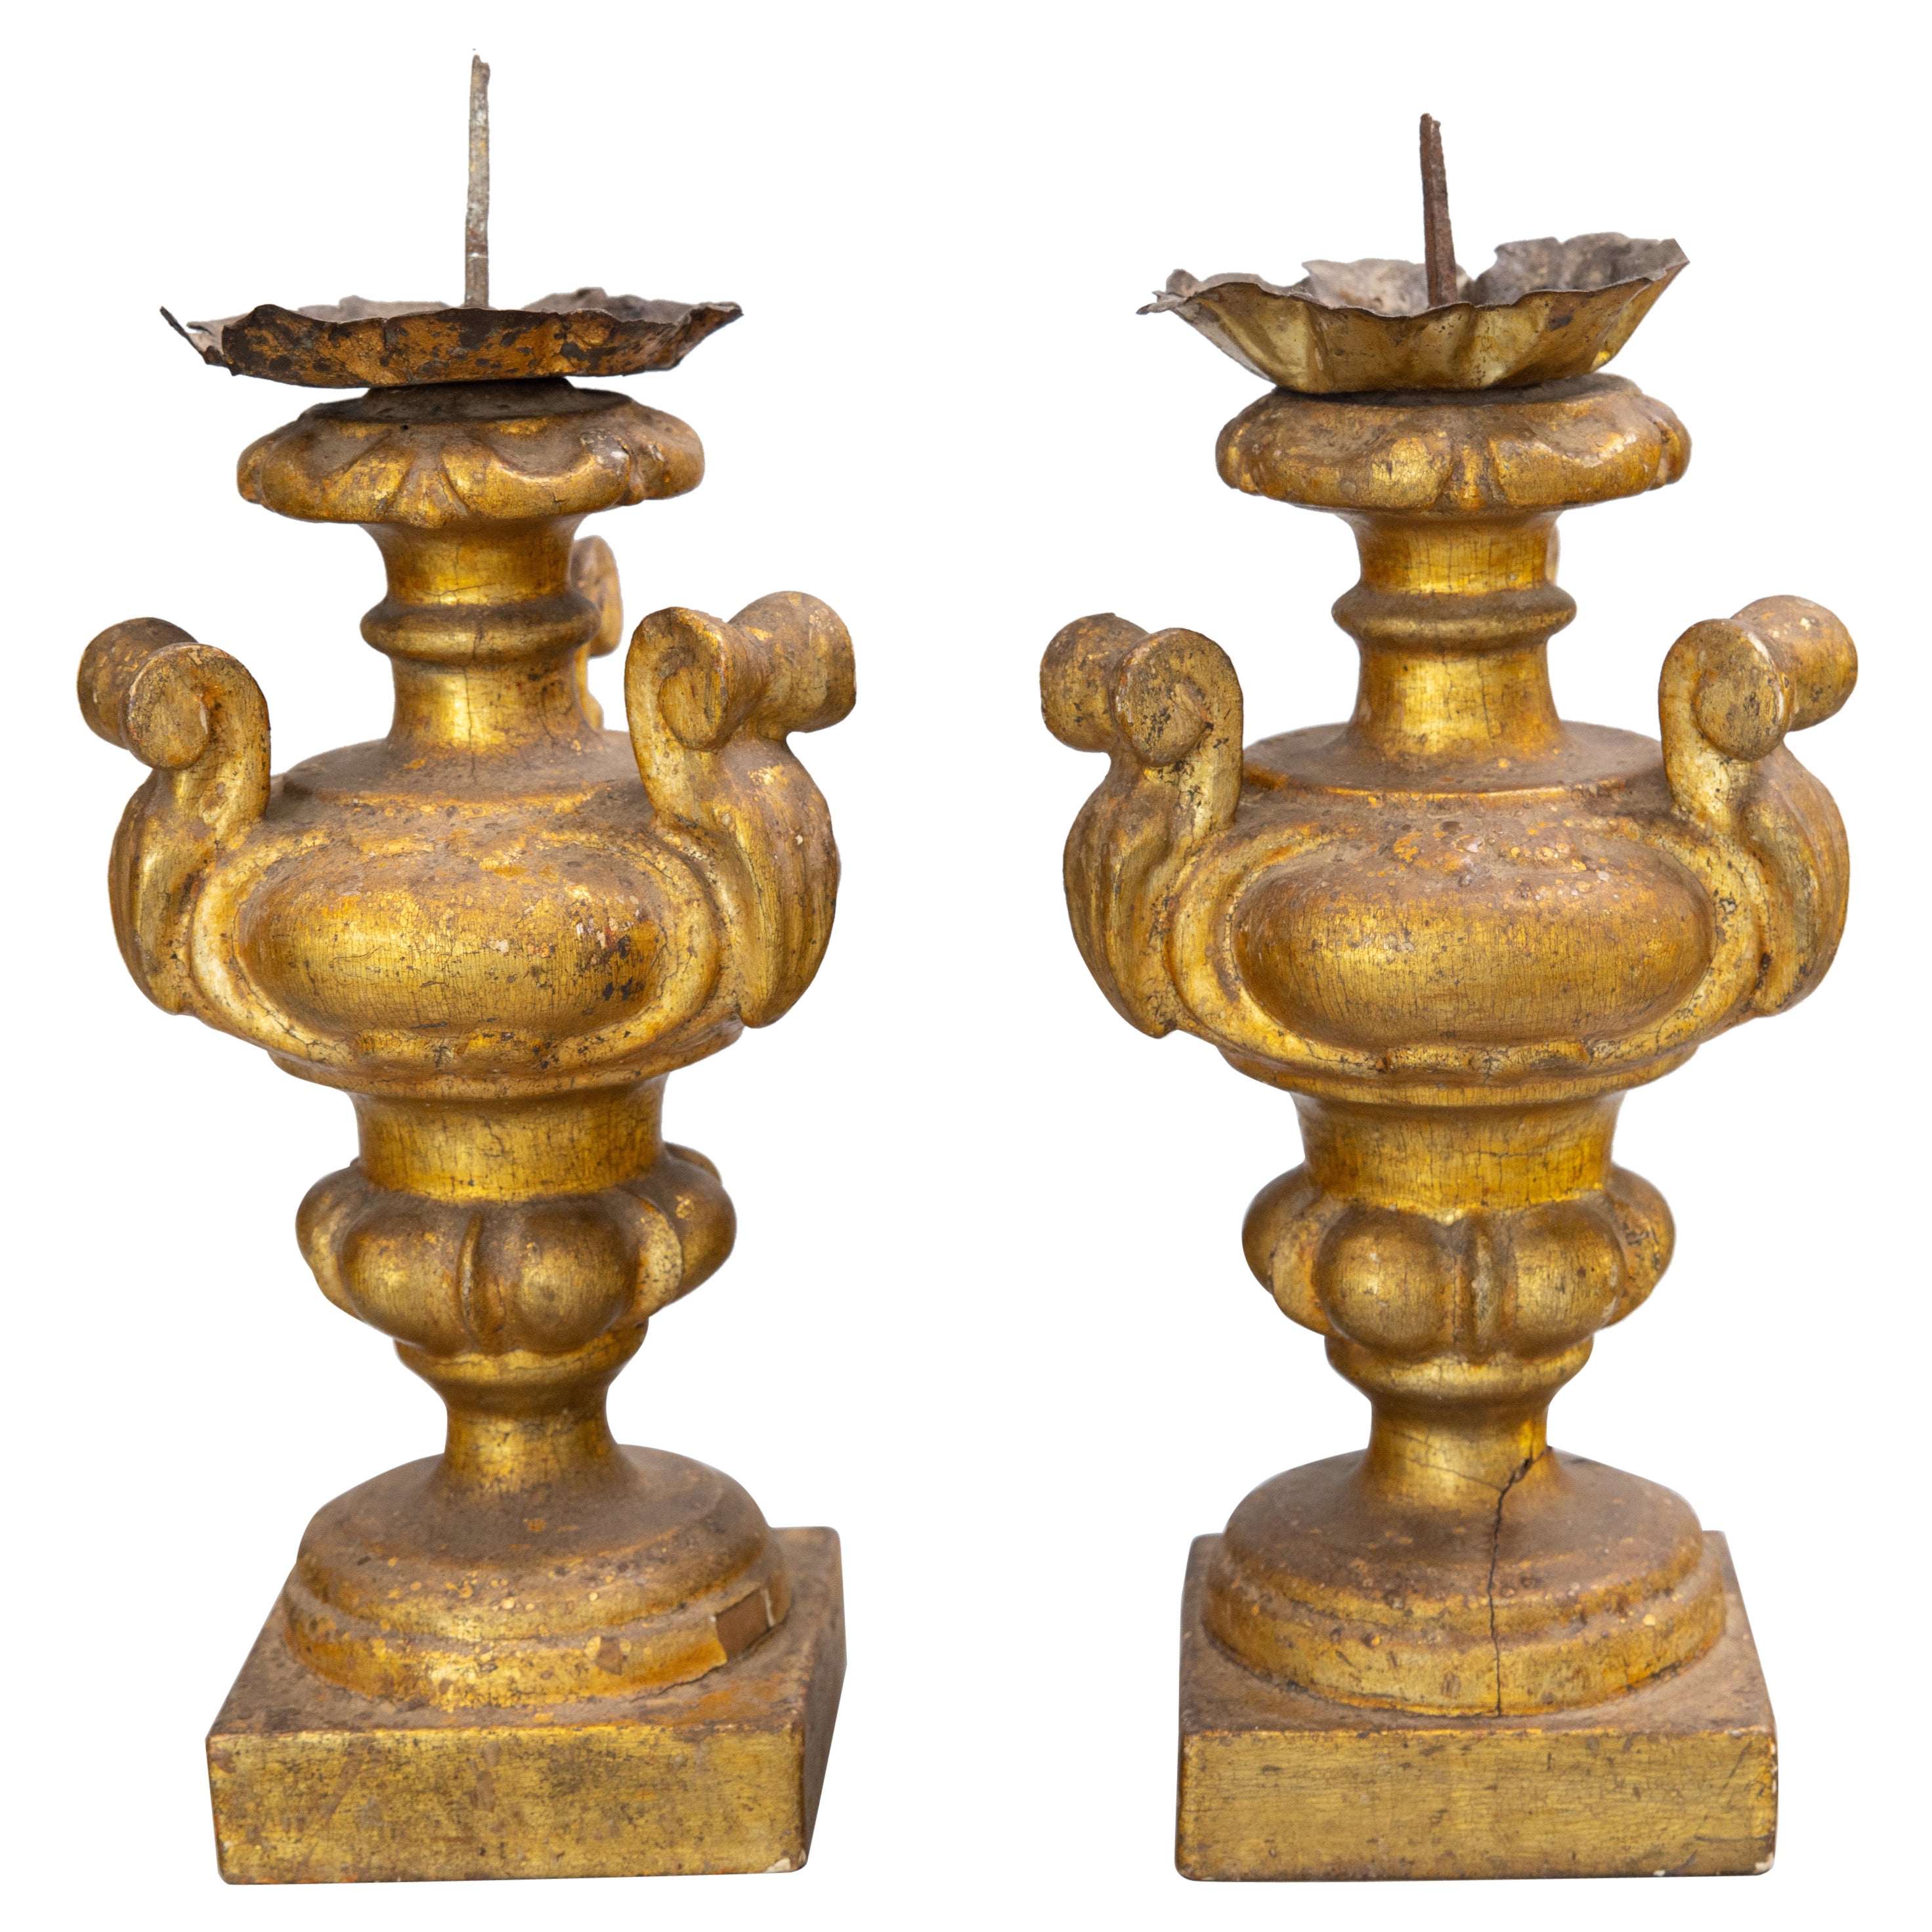 Pair of 18th Century Neoclassical Italian Giltwood Urns Pricket Candlesticks For Sale